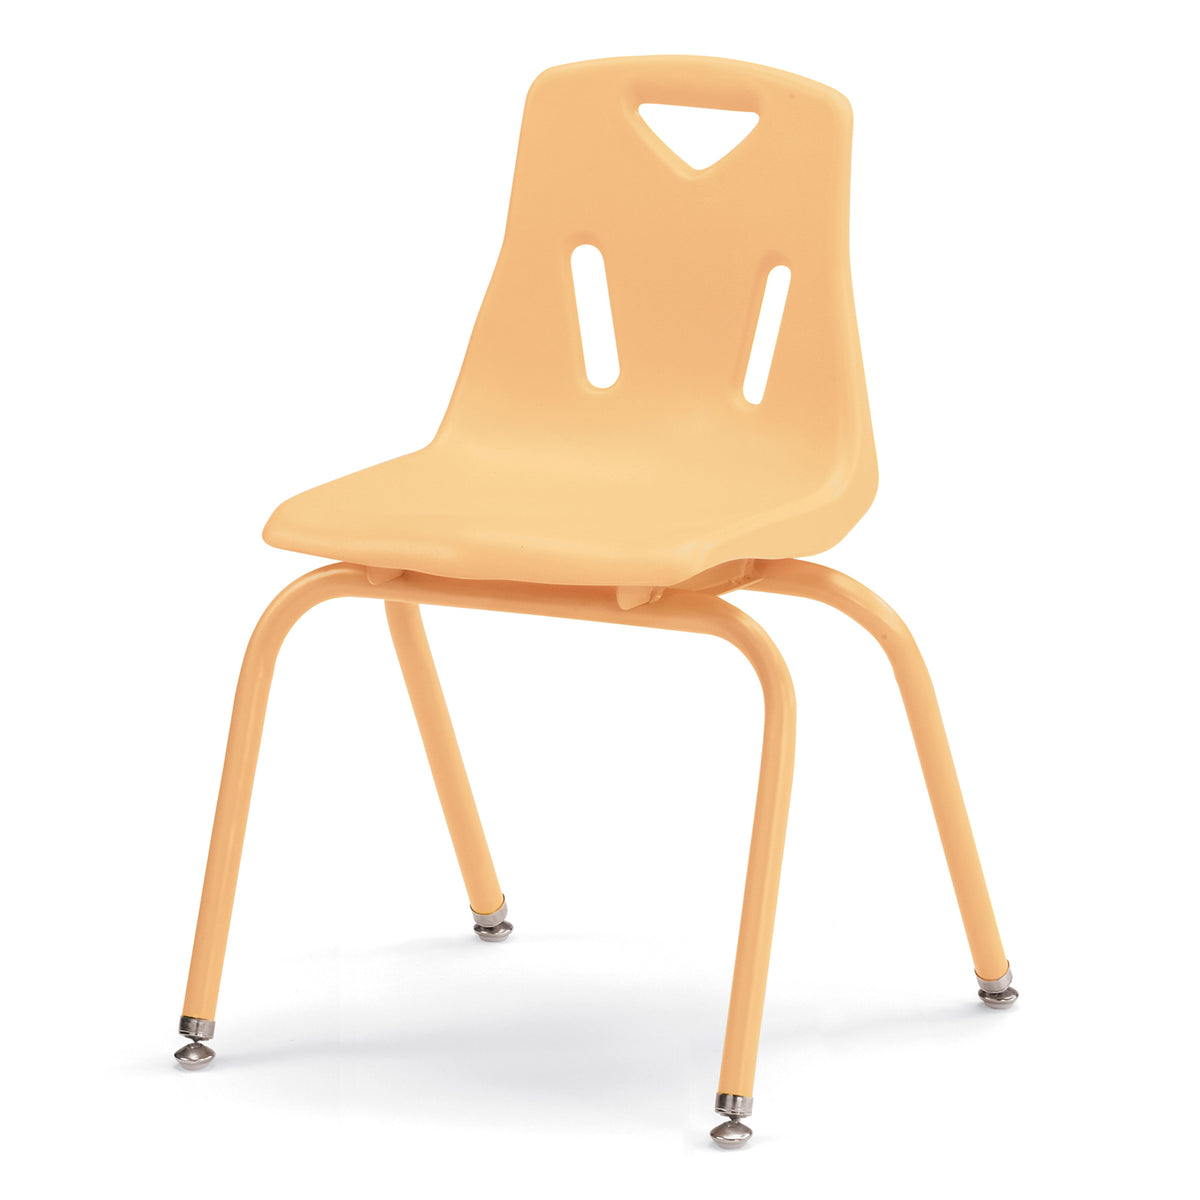 8126JC1251, Berries Stacking Chair with Powder-Coated Legs - 16" Ht - Camel